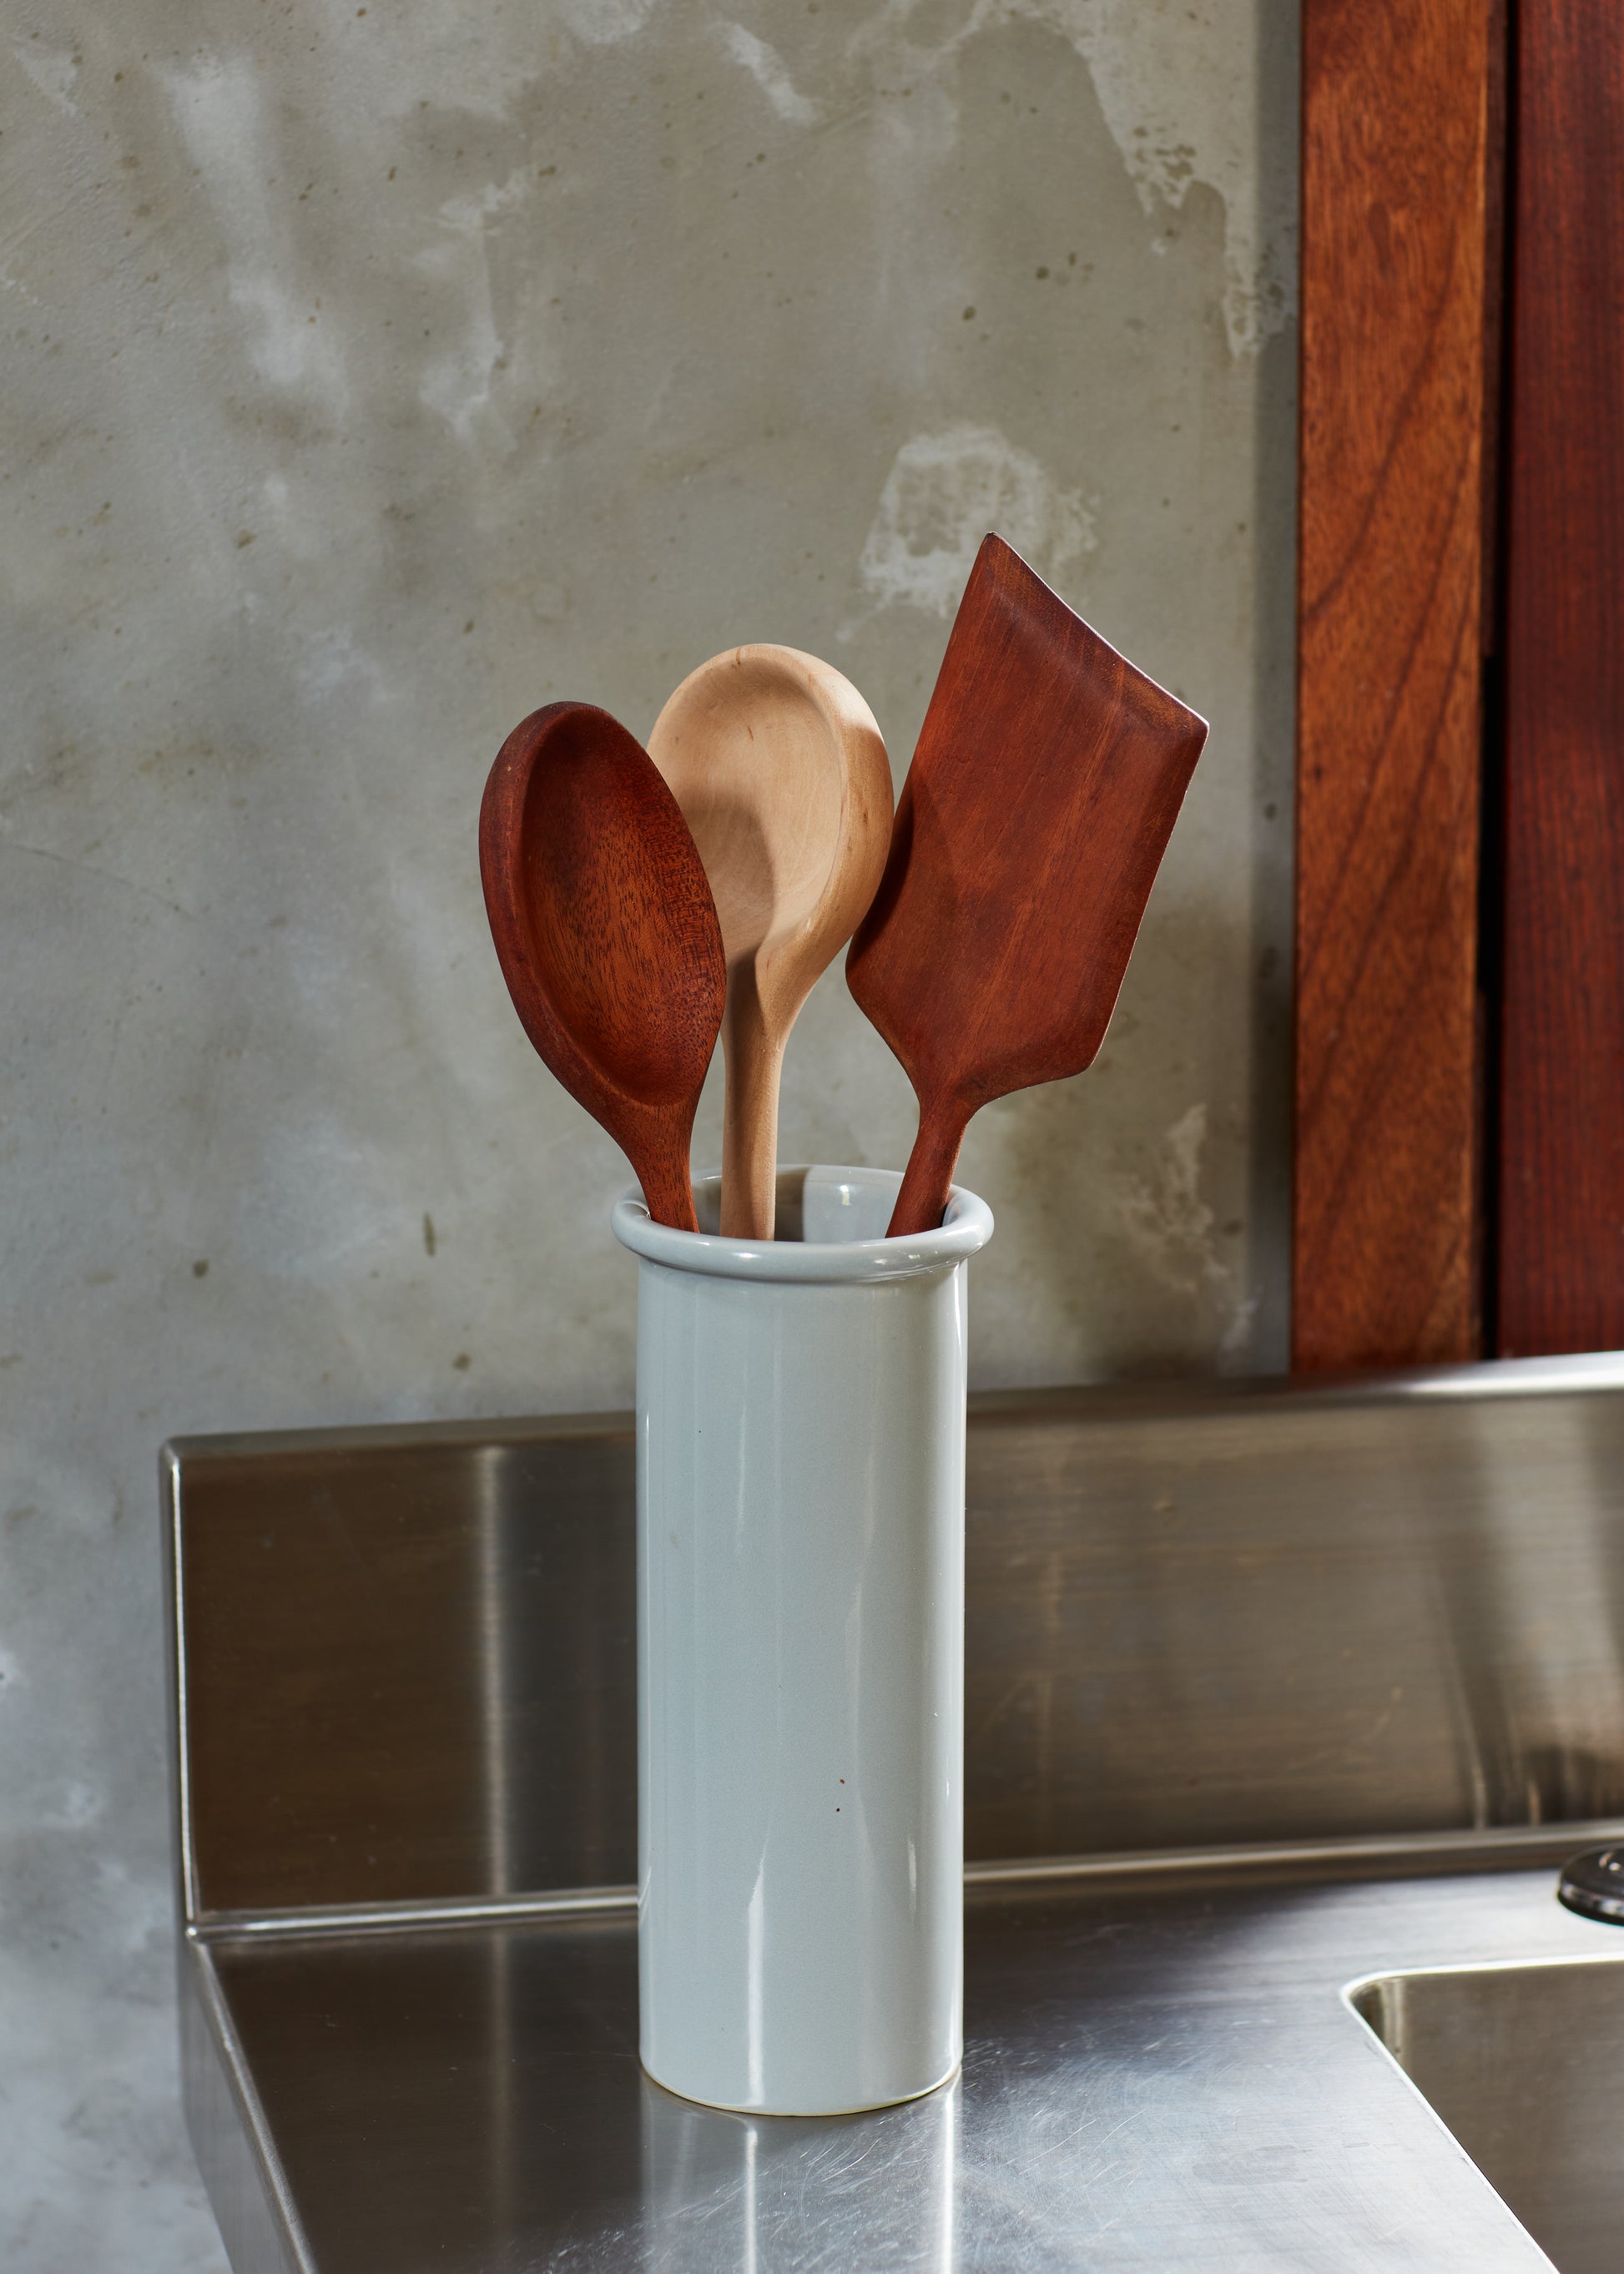 Finished cooking spoons and spatula shown on kitchen counter. By Melanie Abrantes Designs.